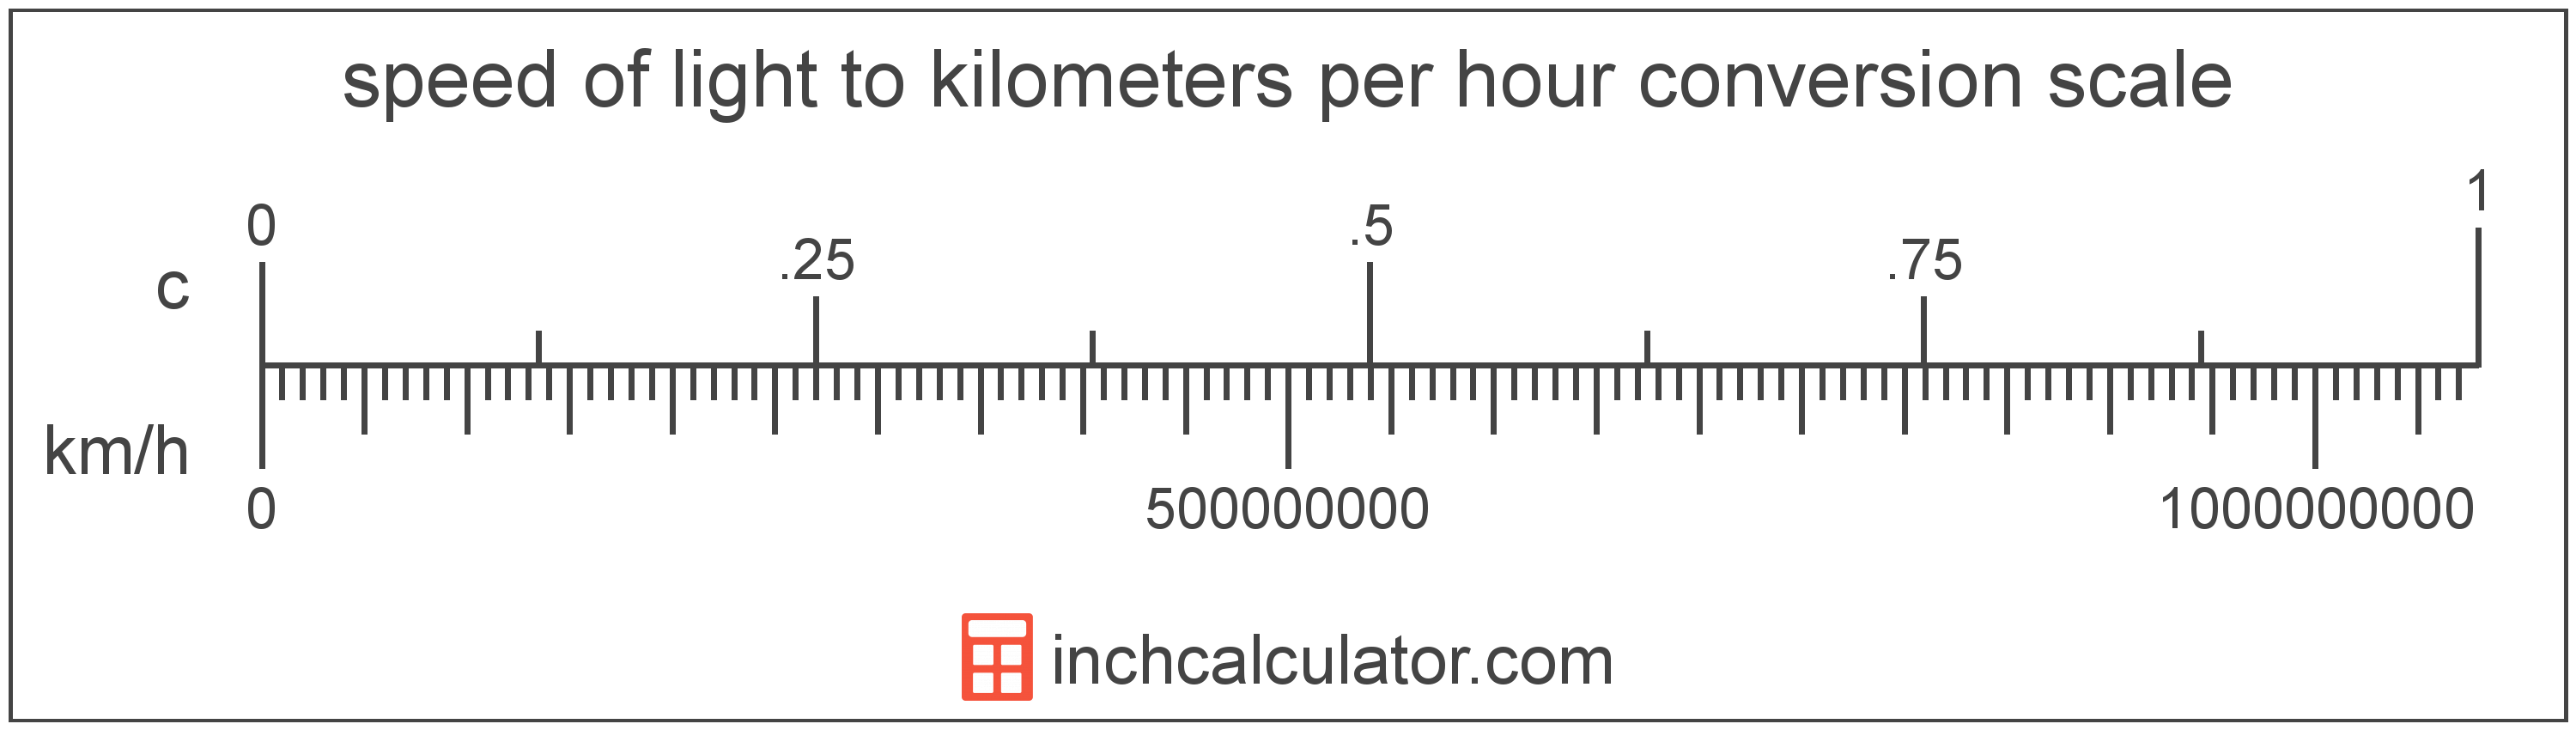 conversion scale showing speed of light and equivalent kilometers per hour speed values